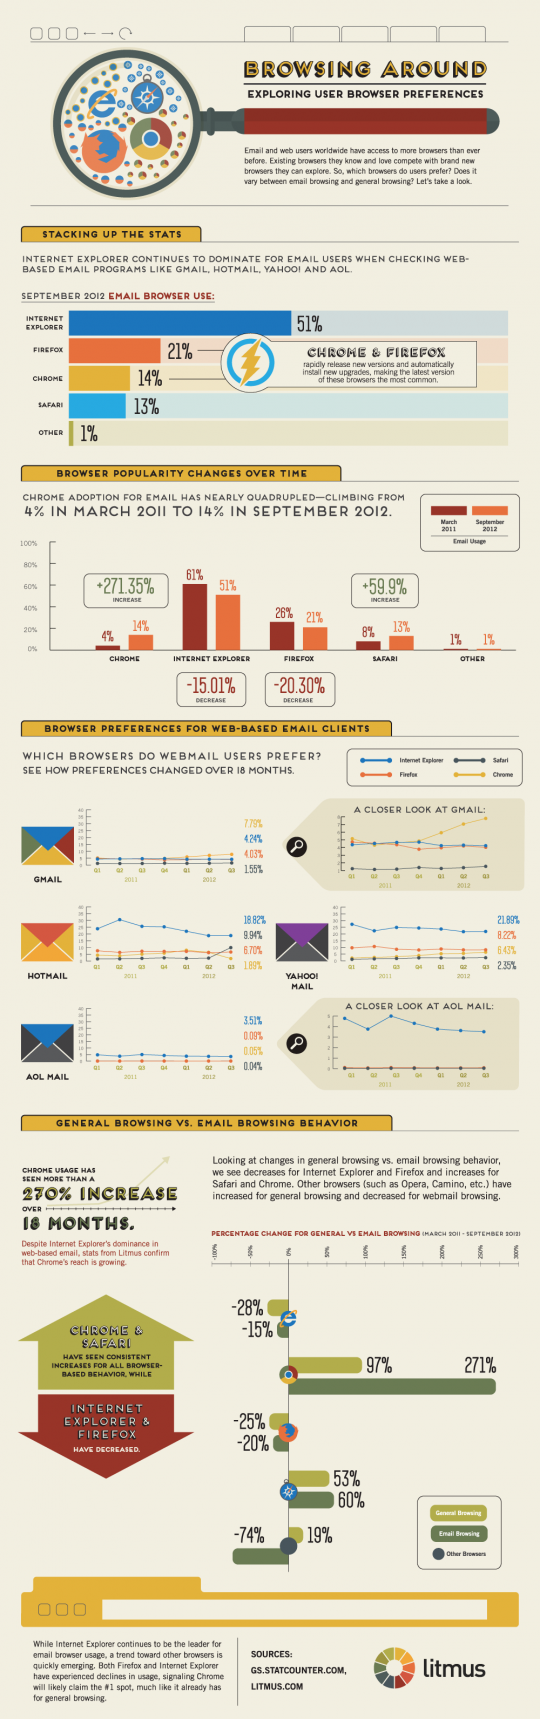 browser-preferences-infographic-540x1719